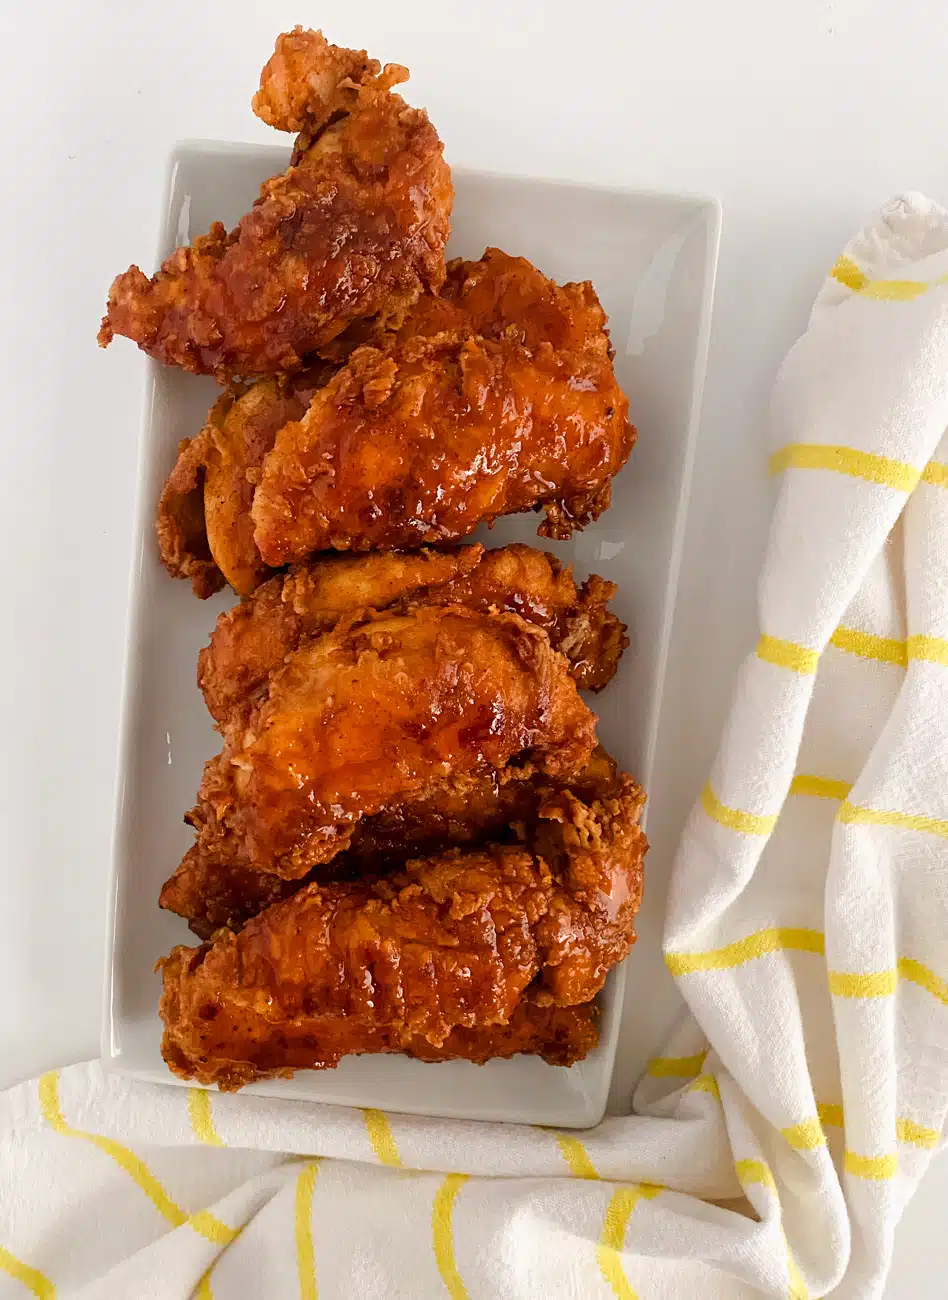 Transfer the chicken tenders as they’re cooked to a wire rack over a paper towel-lined baking sheet. Mix together the glaze ingredients and brush it over the top of the hot tenders and serve.